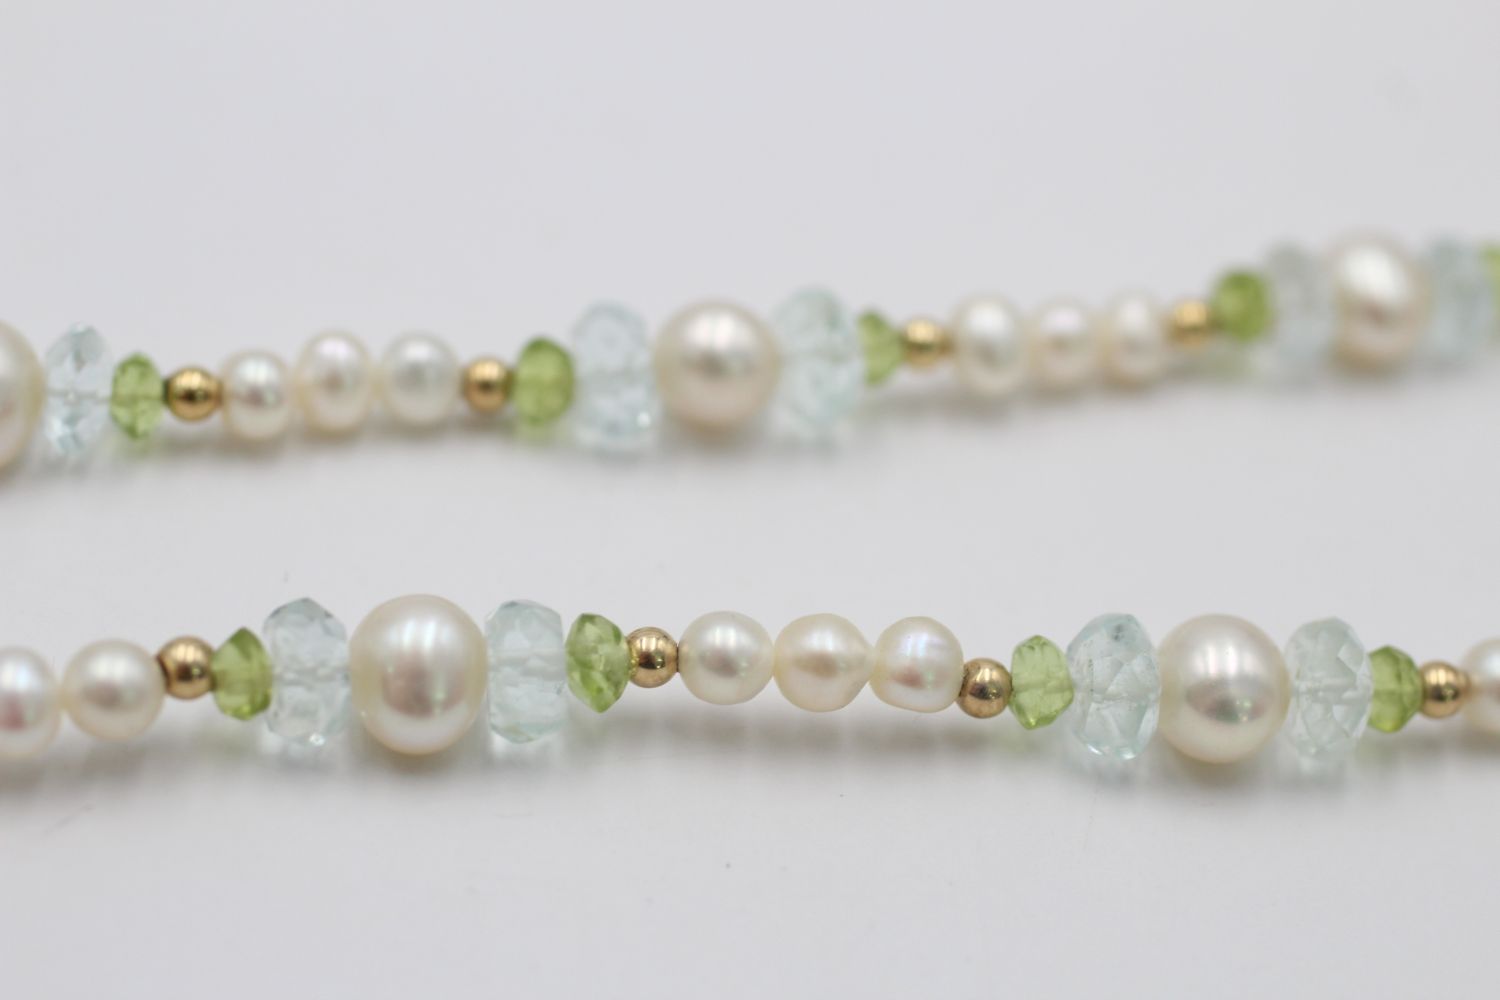 14ct gold clasp and beads pearl, peridot & aquamarine single strand necklace (17.2g) - Image 3 of 5